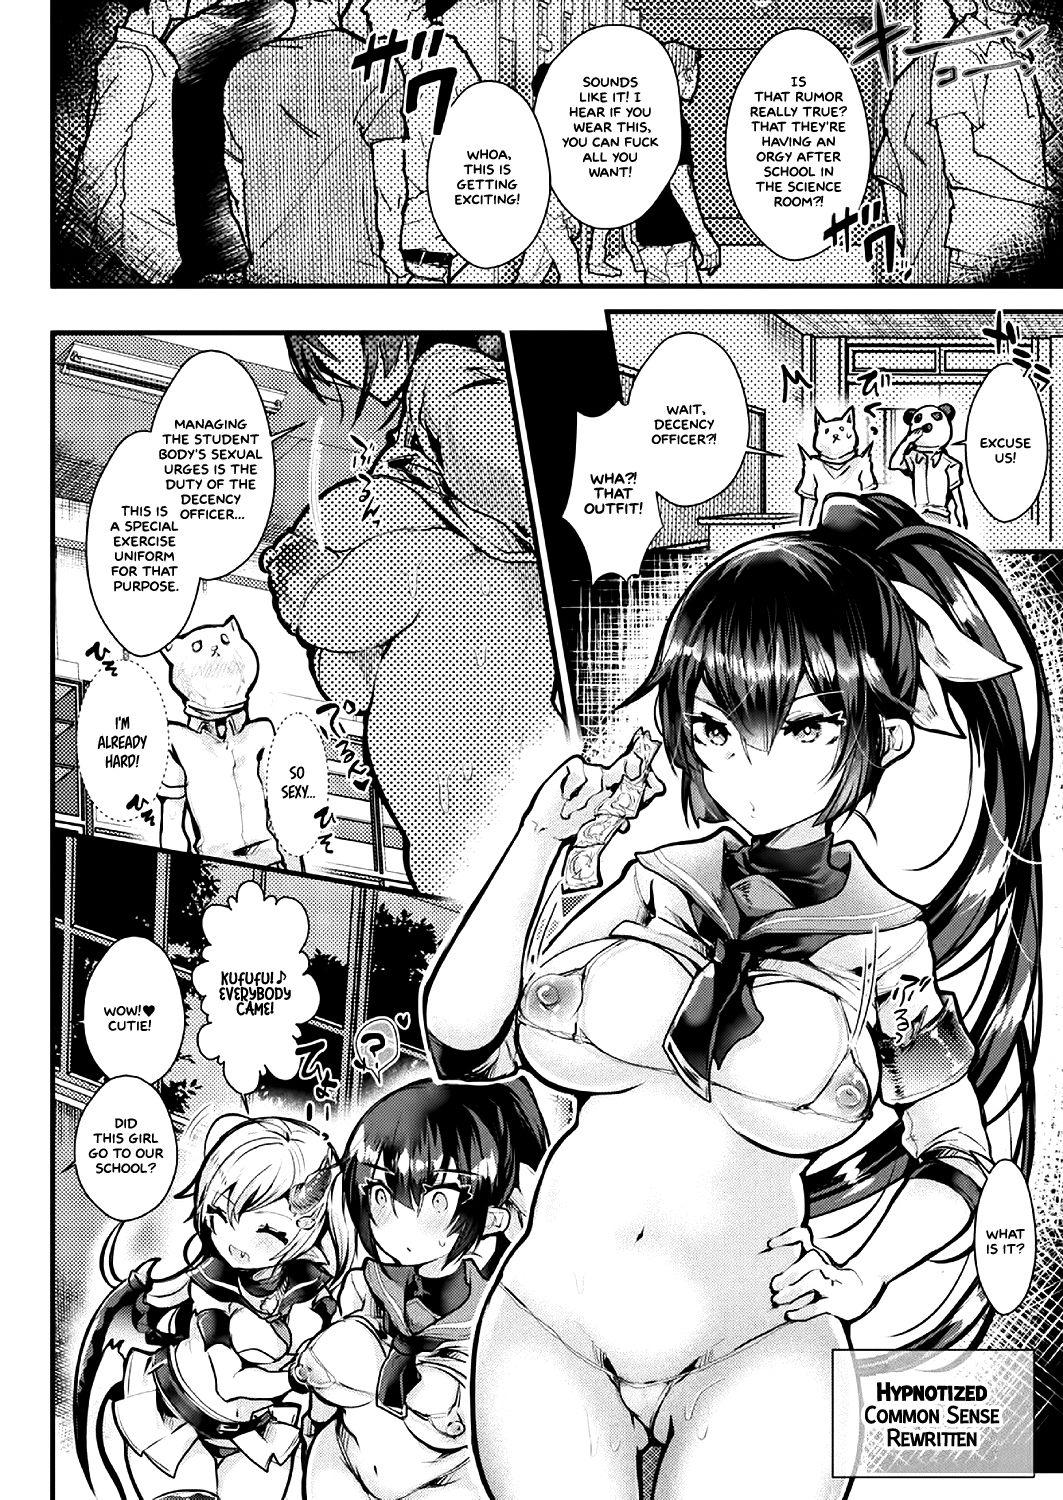 Weird Let's join the After School Sex Club! Masturbation - Page 4